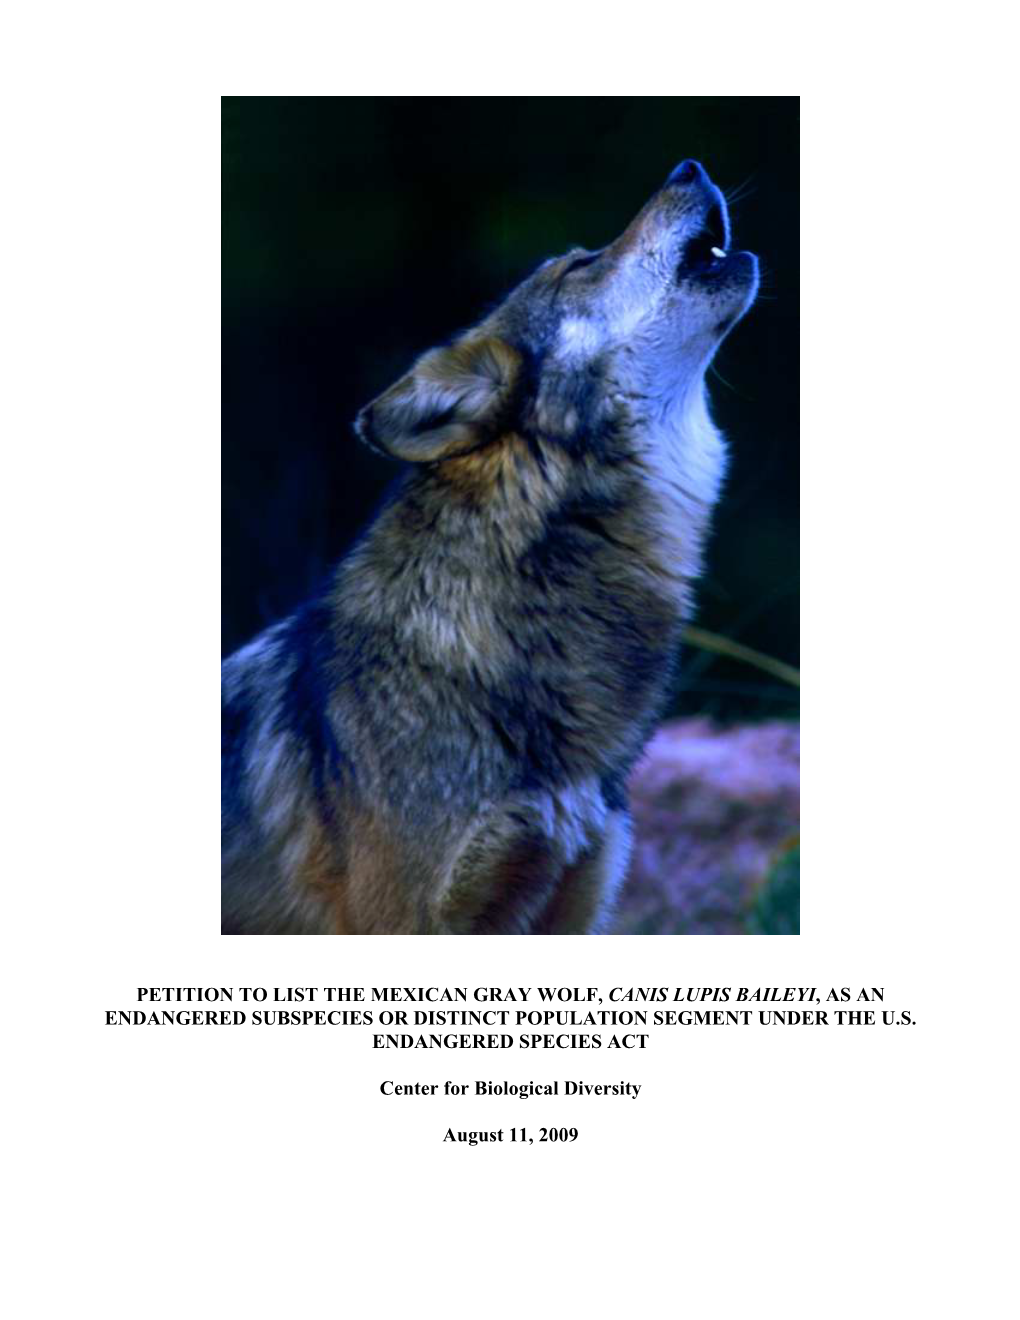 Petition to List the Mexican Gray Wolf, Canis Lupis Baileyi, As an Endangered Subspecies Or Distinct Population Segment Under the U.S